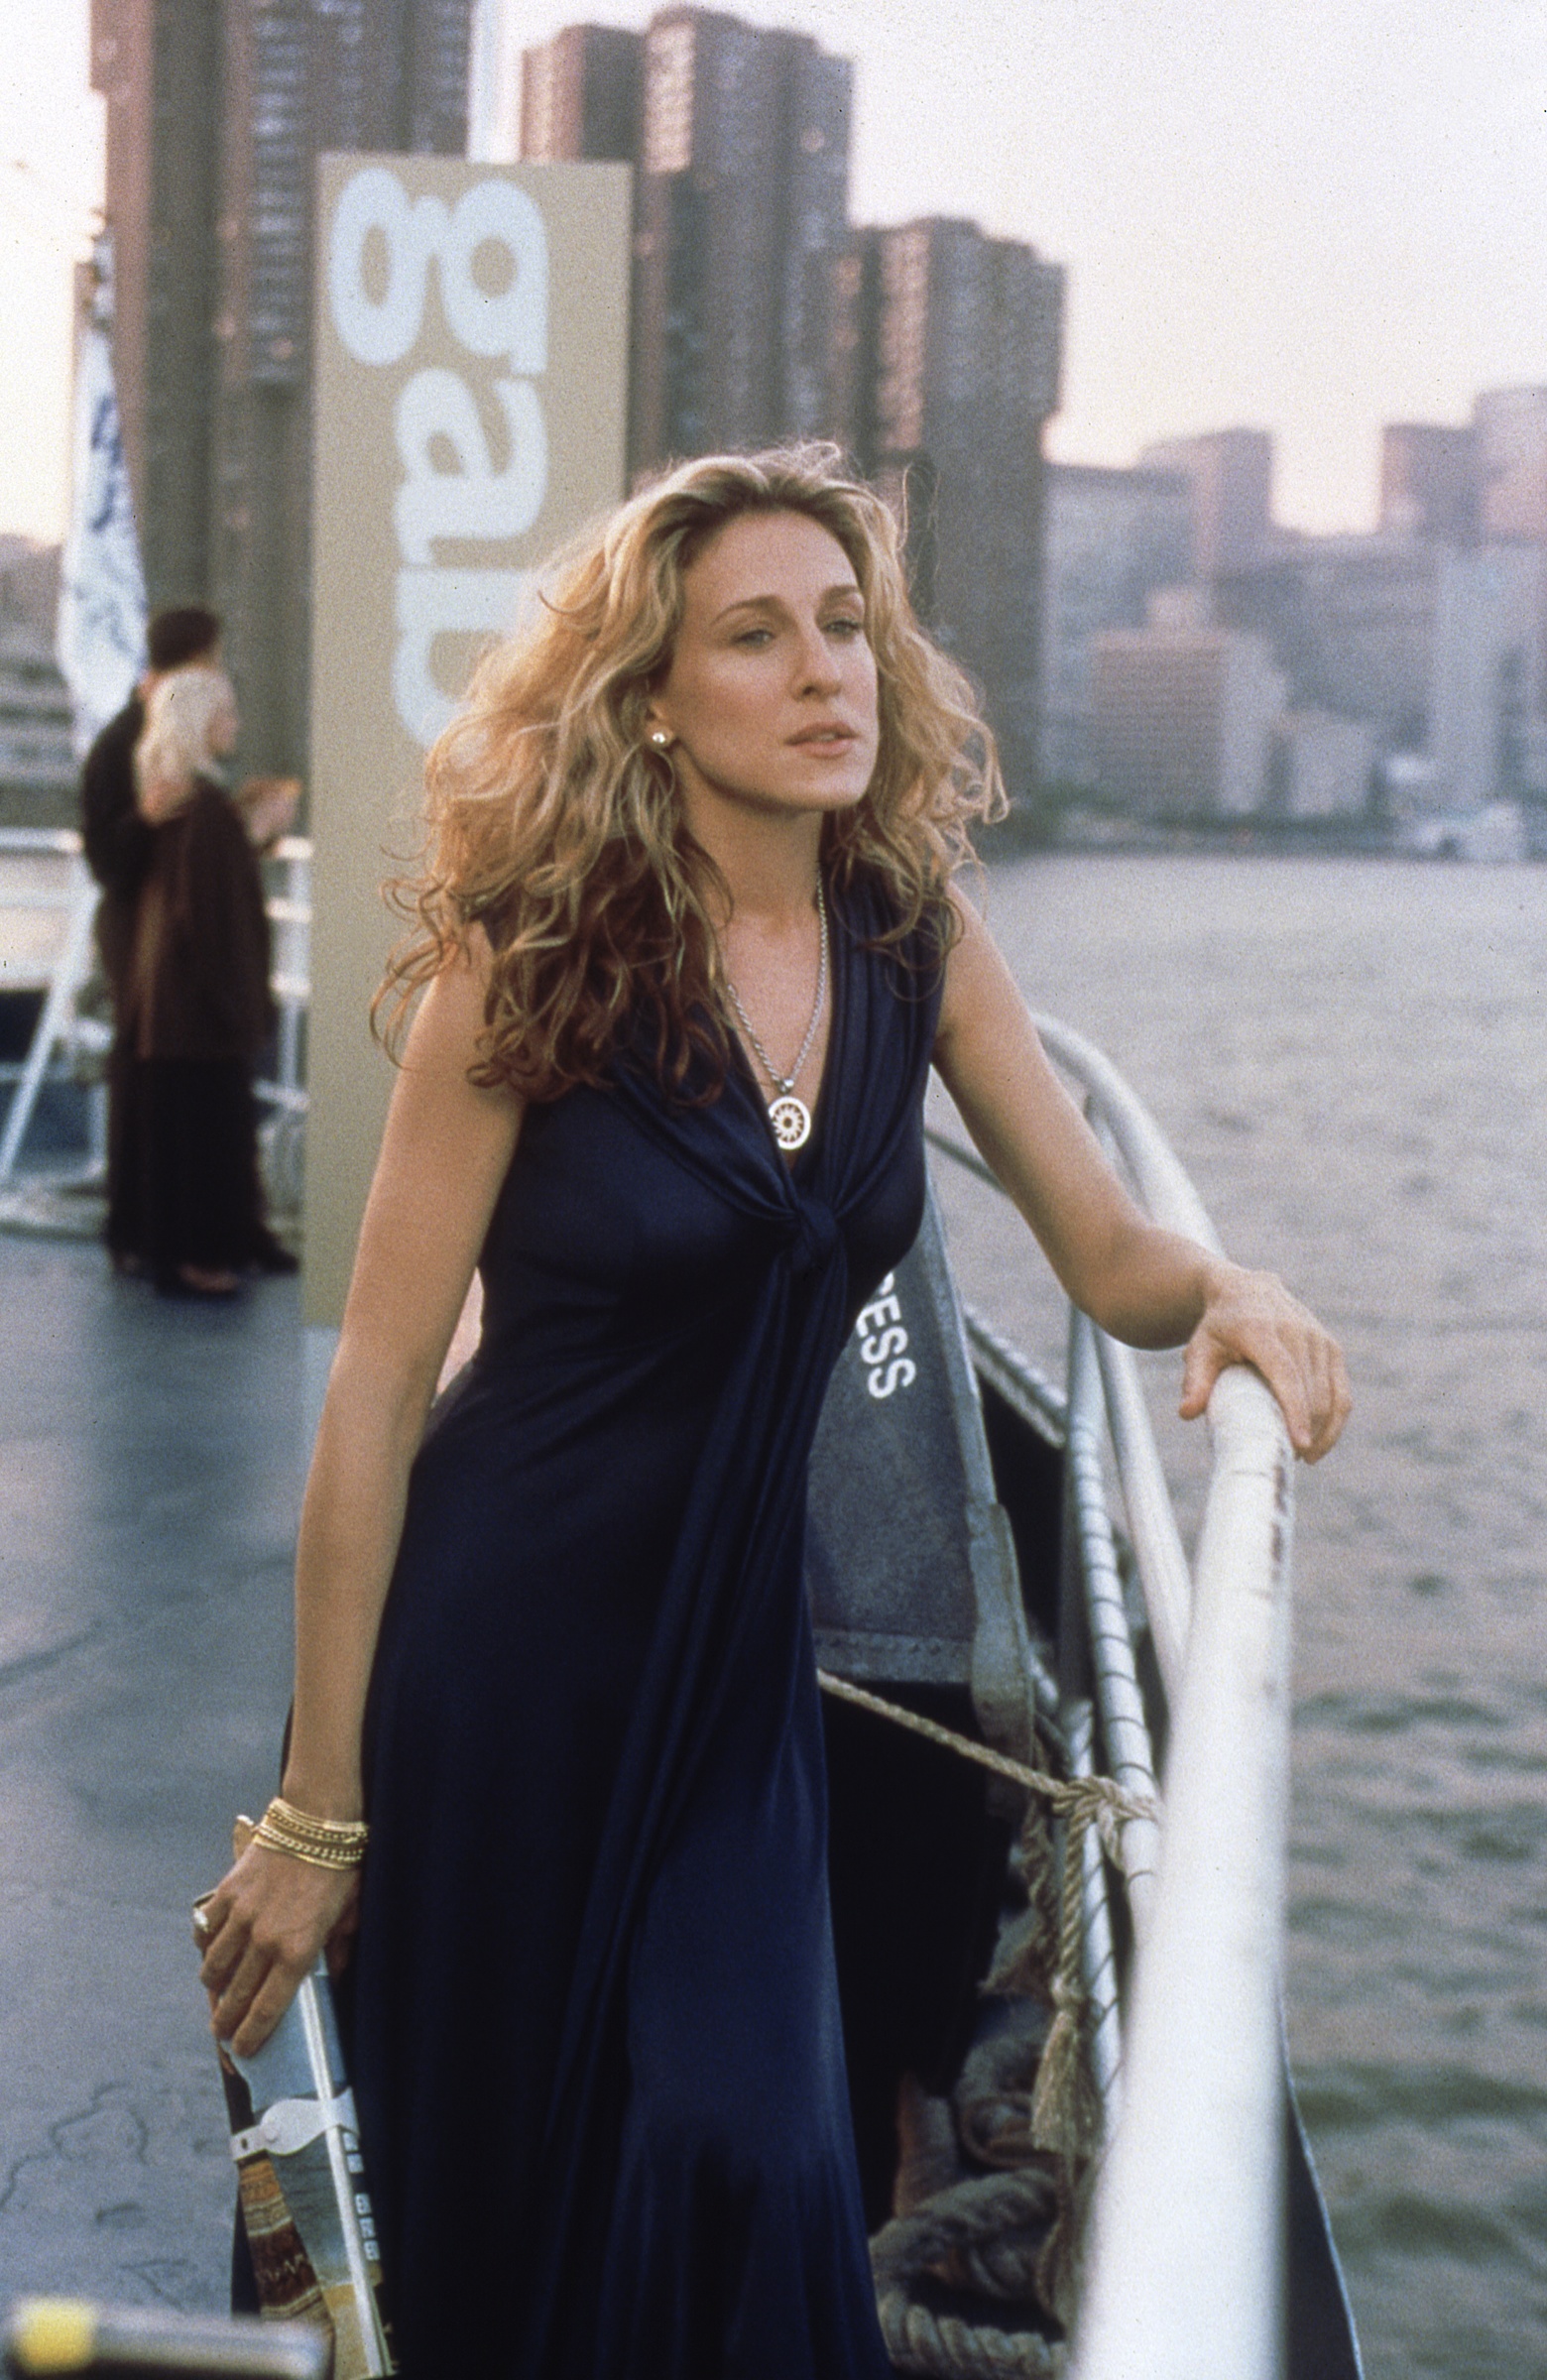 PHOTO: Actress Sarah Jessica Parker Stars As Carrie In The Hbo Comedy Series 'Sex And The City'.